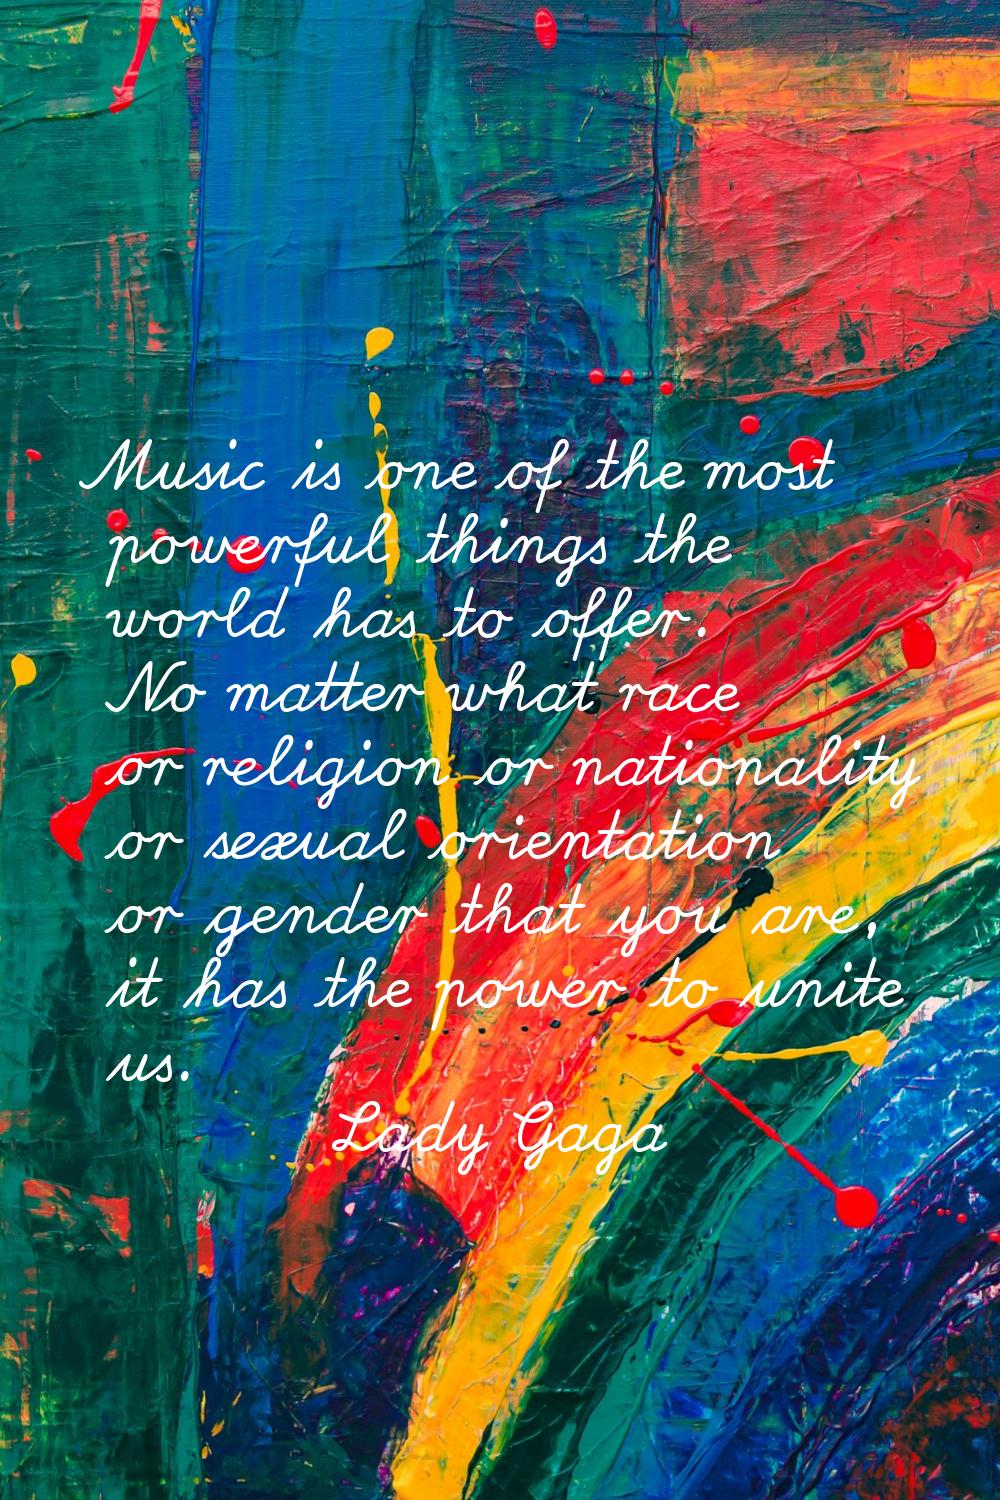 Music is one of the most powerful things the world has to offer. No matter what race or religion or